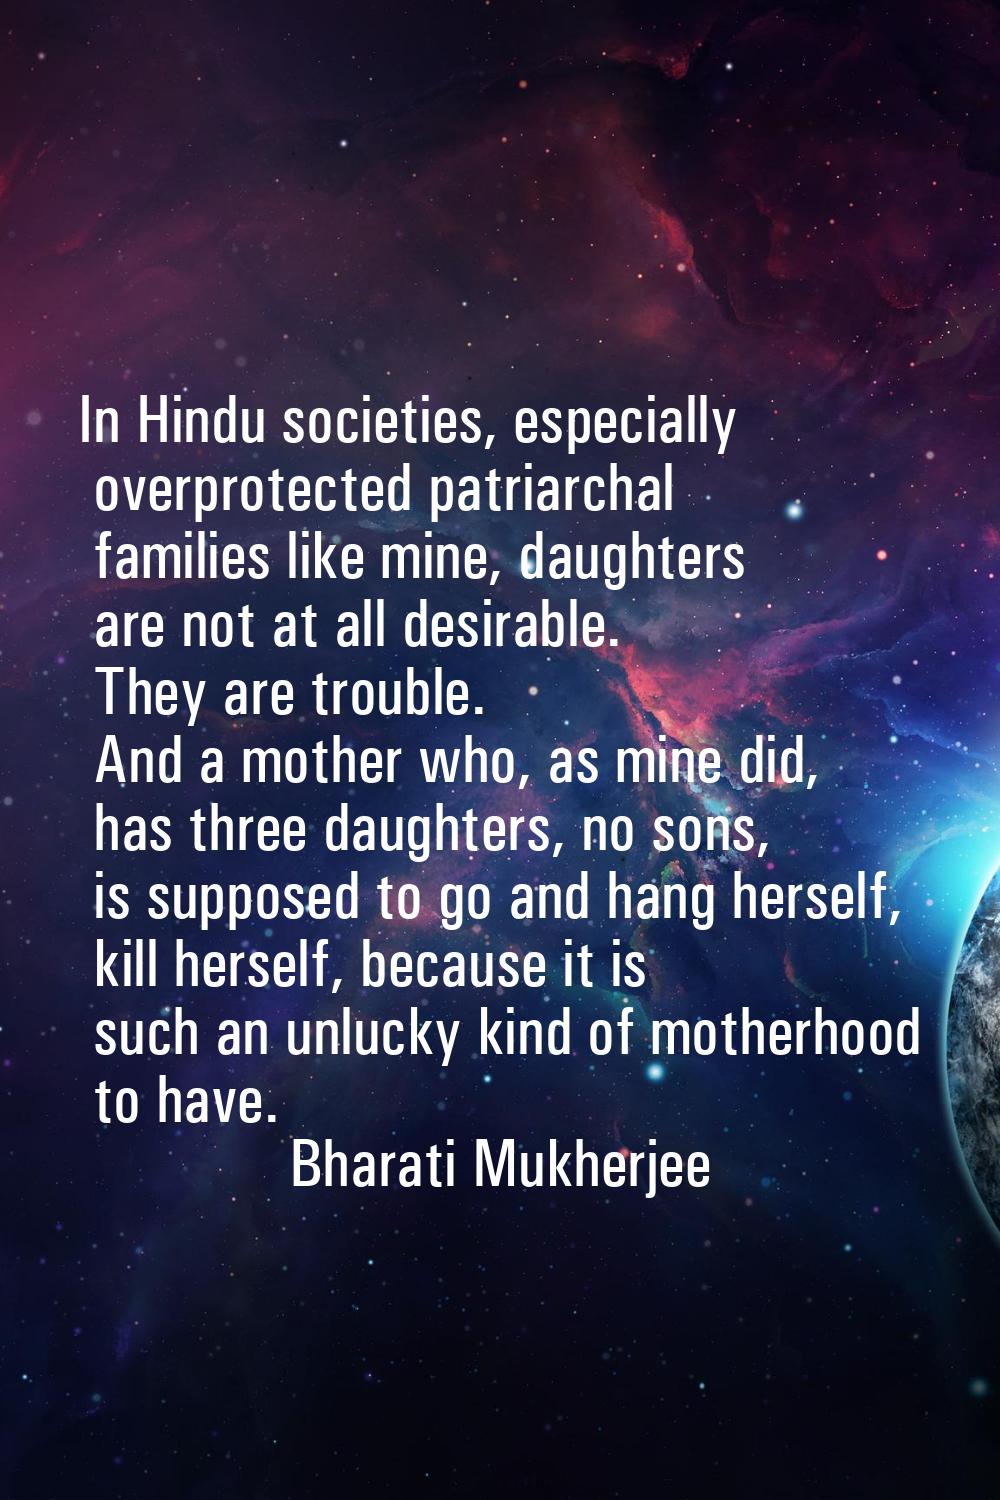 In Hindu societies, especially overprotected patriarchal families like mine, daughters are not at a